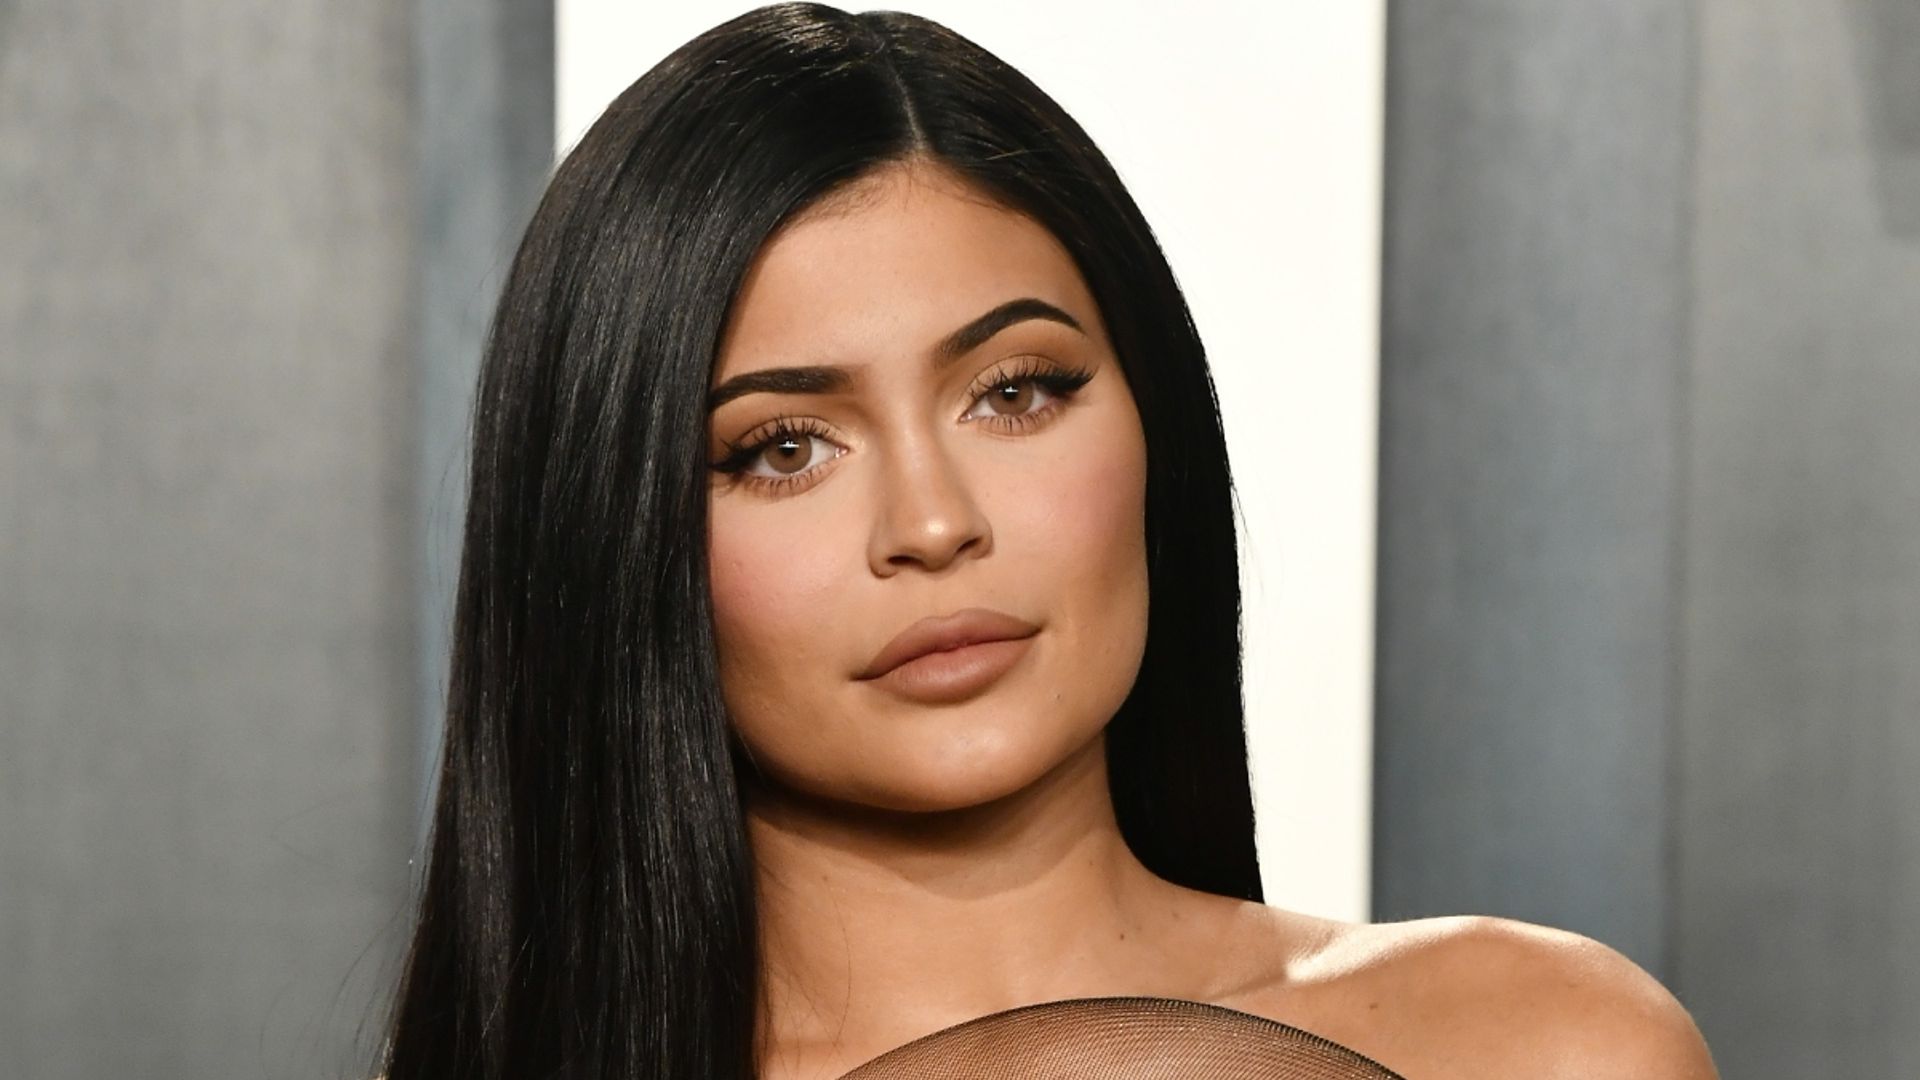 Kylie Jenner confirmed her pregnancy in the most heartwarming way | HELLO!